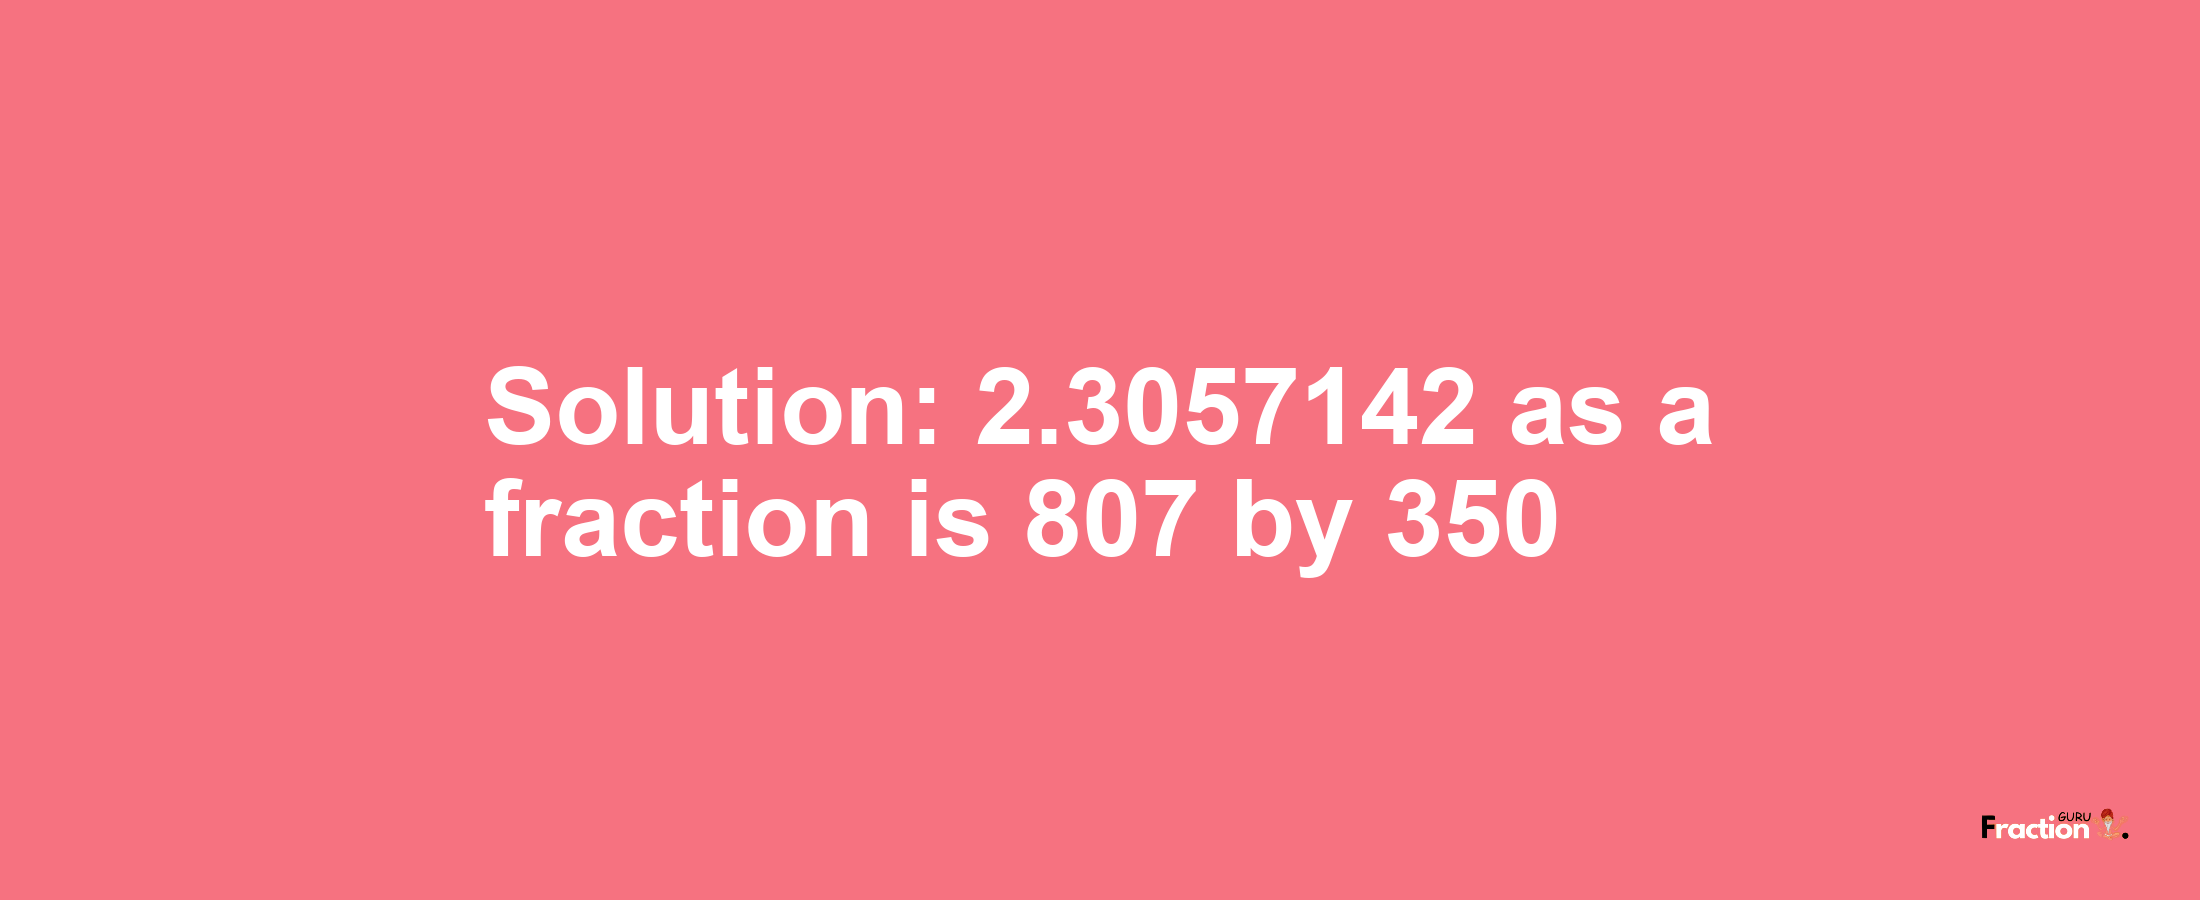 Solution:2.3057142 as a fraction is 807/350